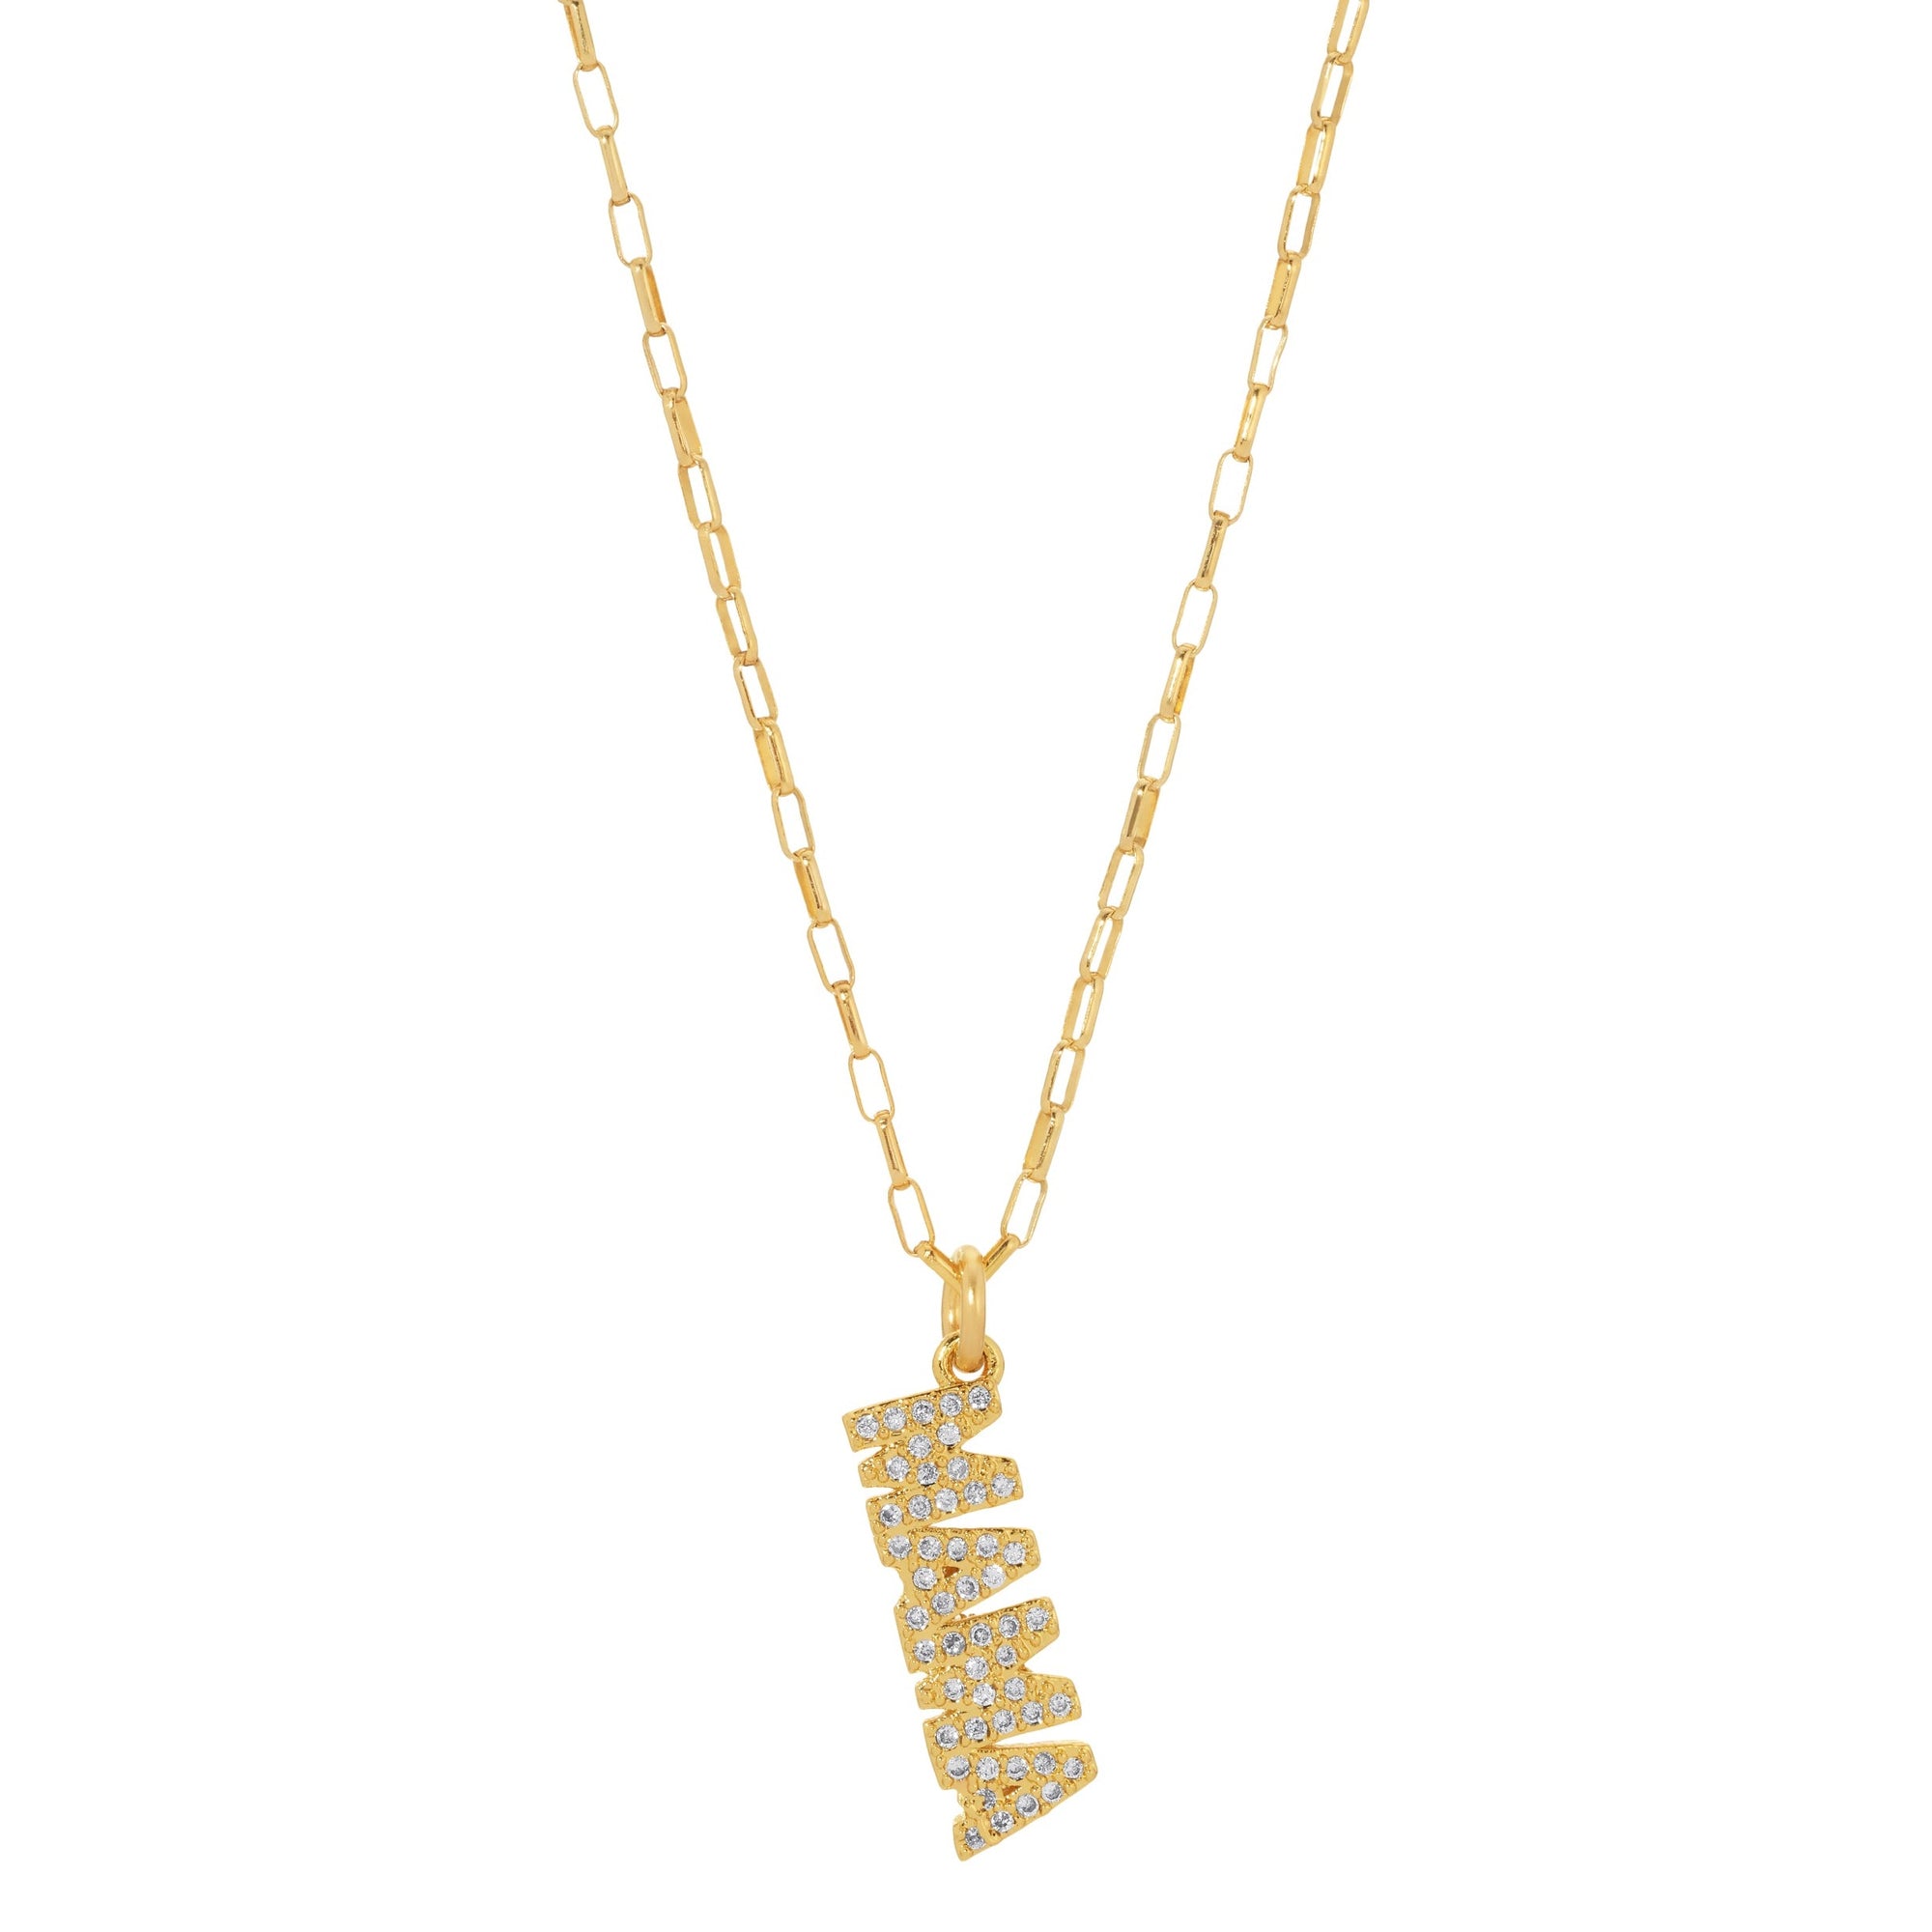 The Mama Necklace by Erin Fader Jewelry